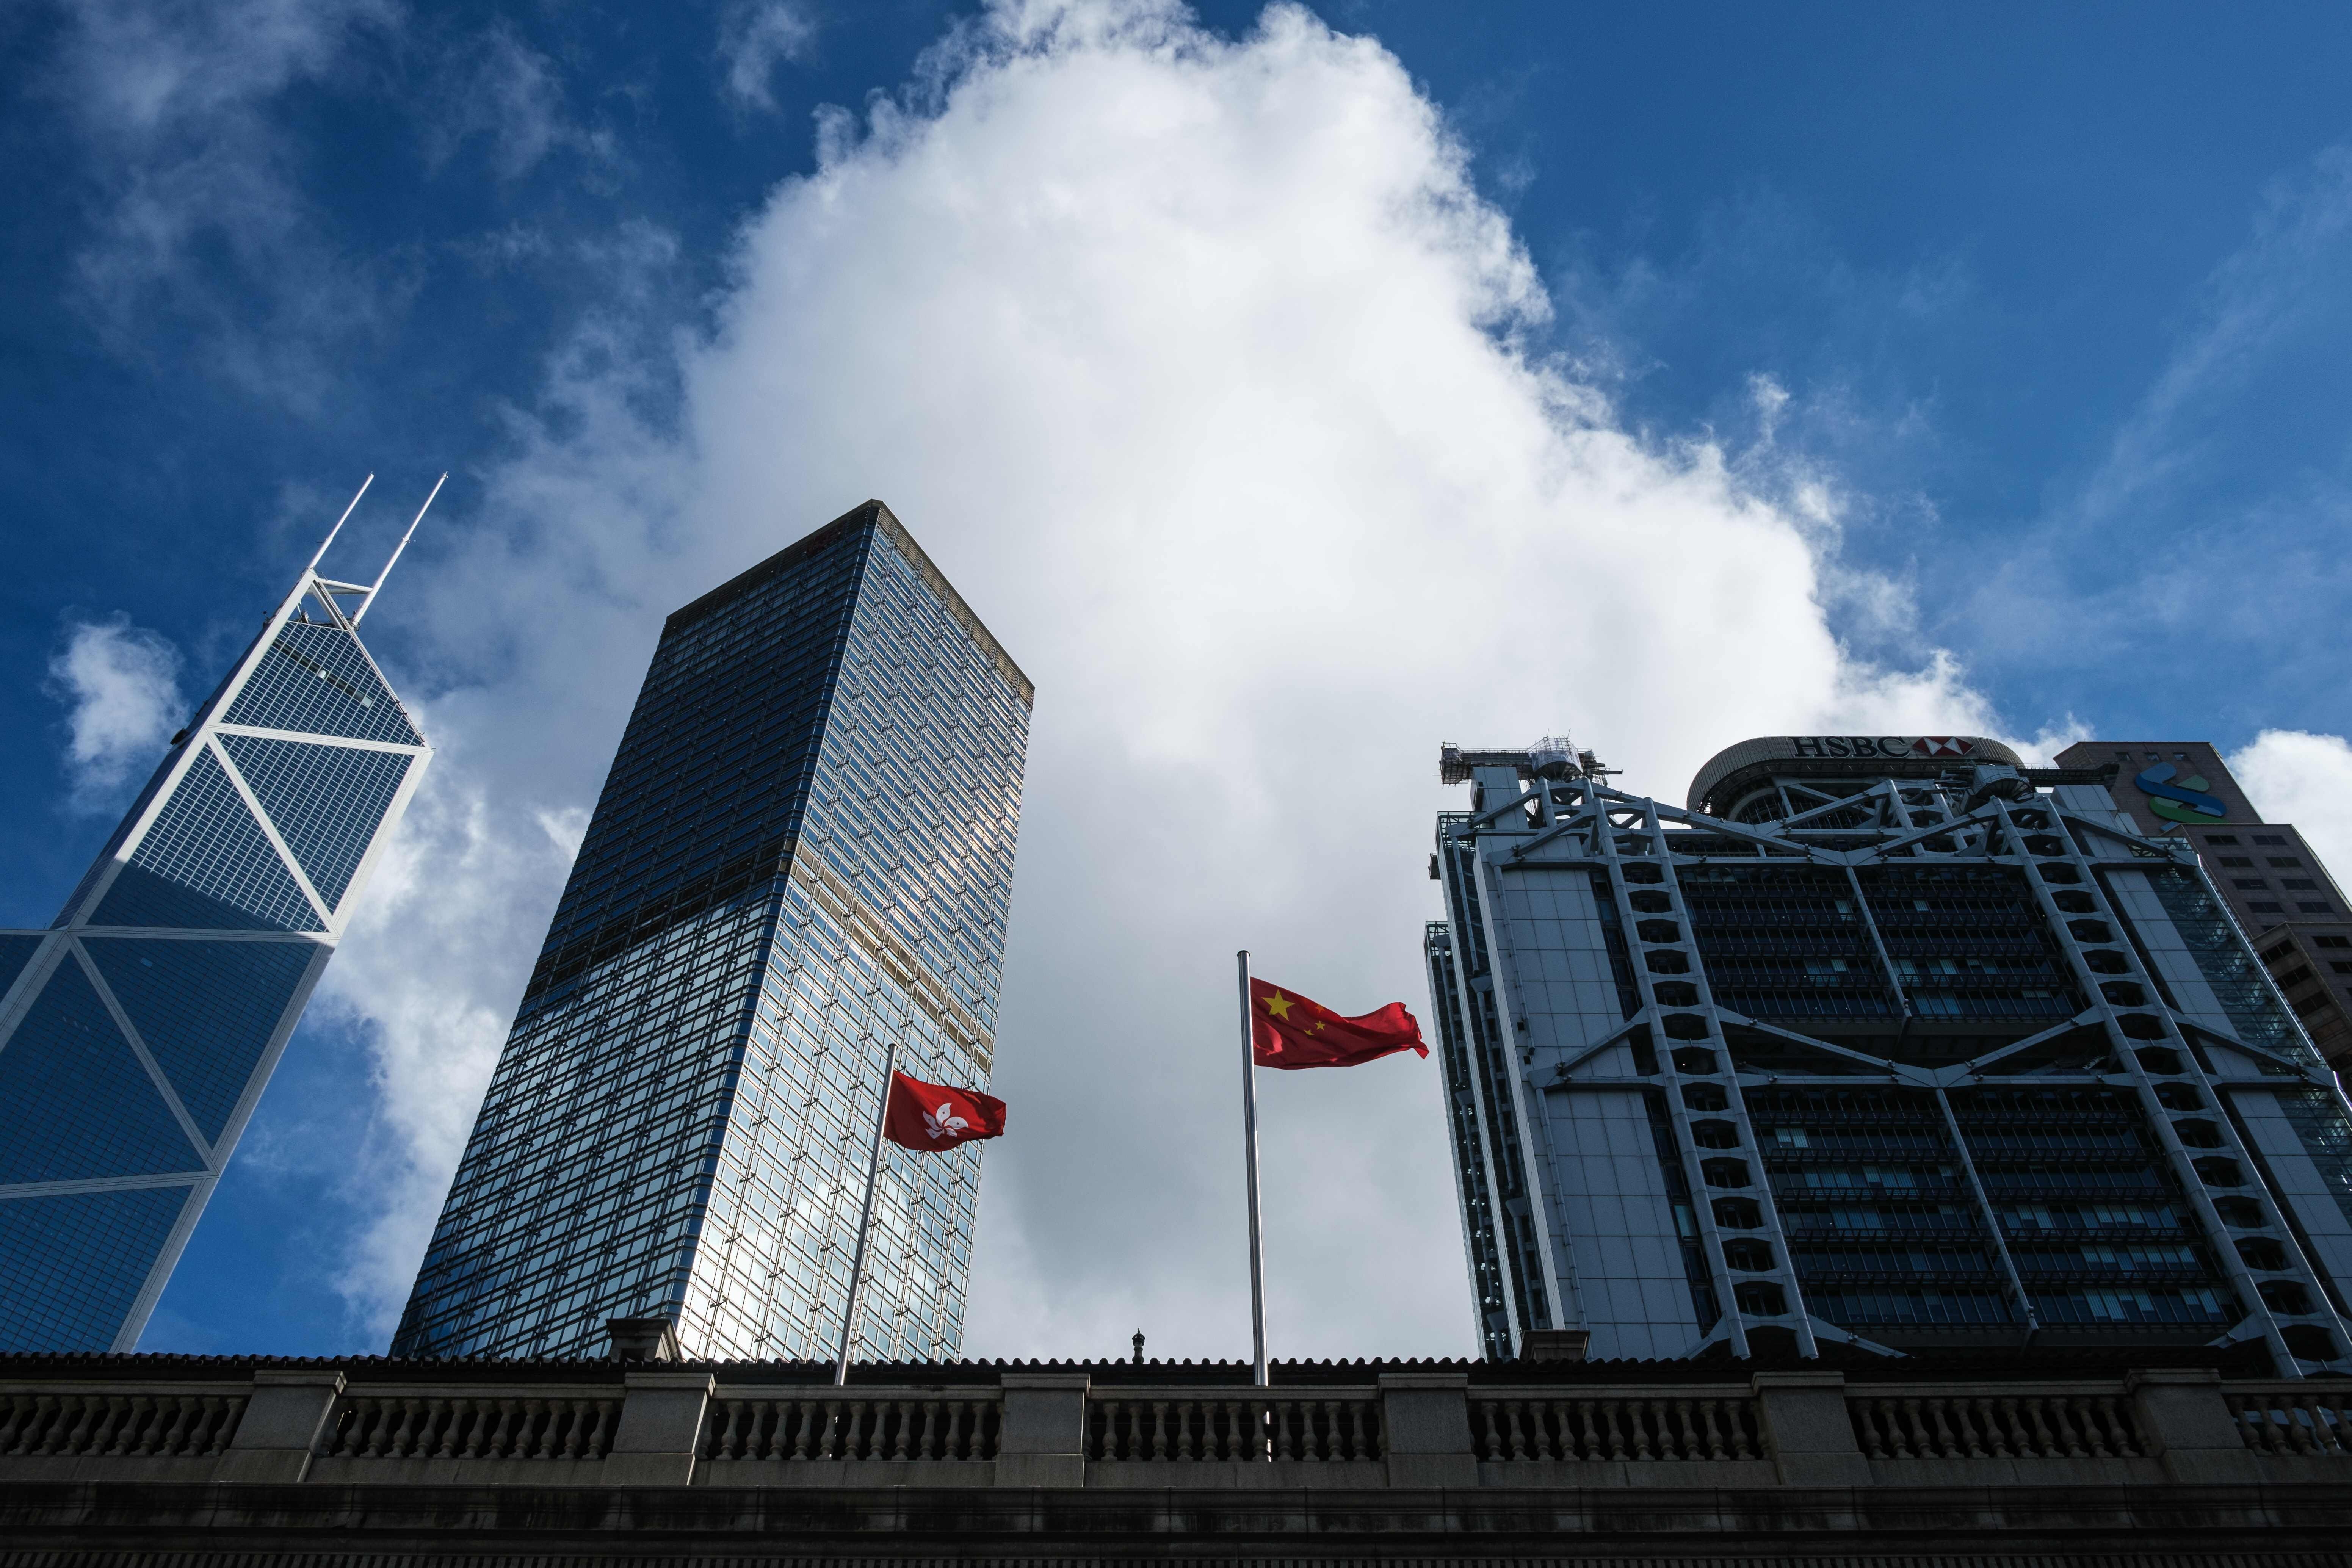 The Chinese national flag and the Hong Kong flag fly outside the Court of Final Appeal in Hong Kong in July. Beijing’s call for judicial reform has clarified that the finality in the “power of final adjudication” of Hong Kong as vested in the Court of Final Appeal had been misunderstood. Photo: AFP